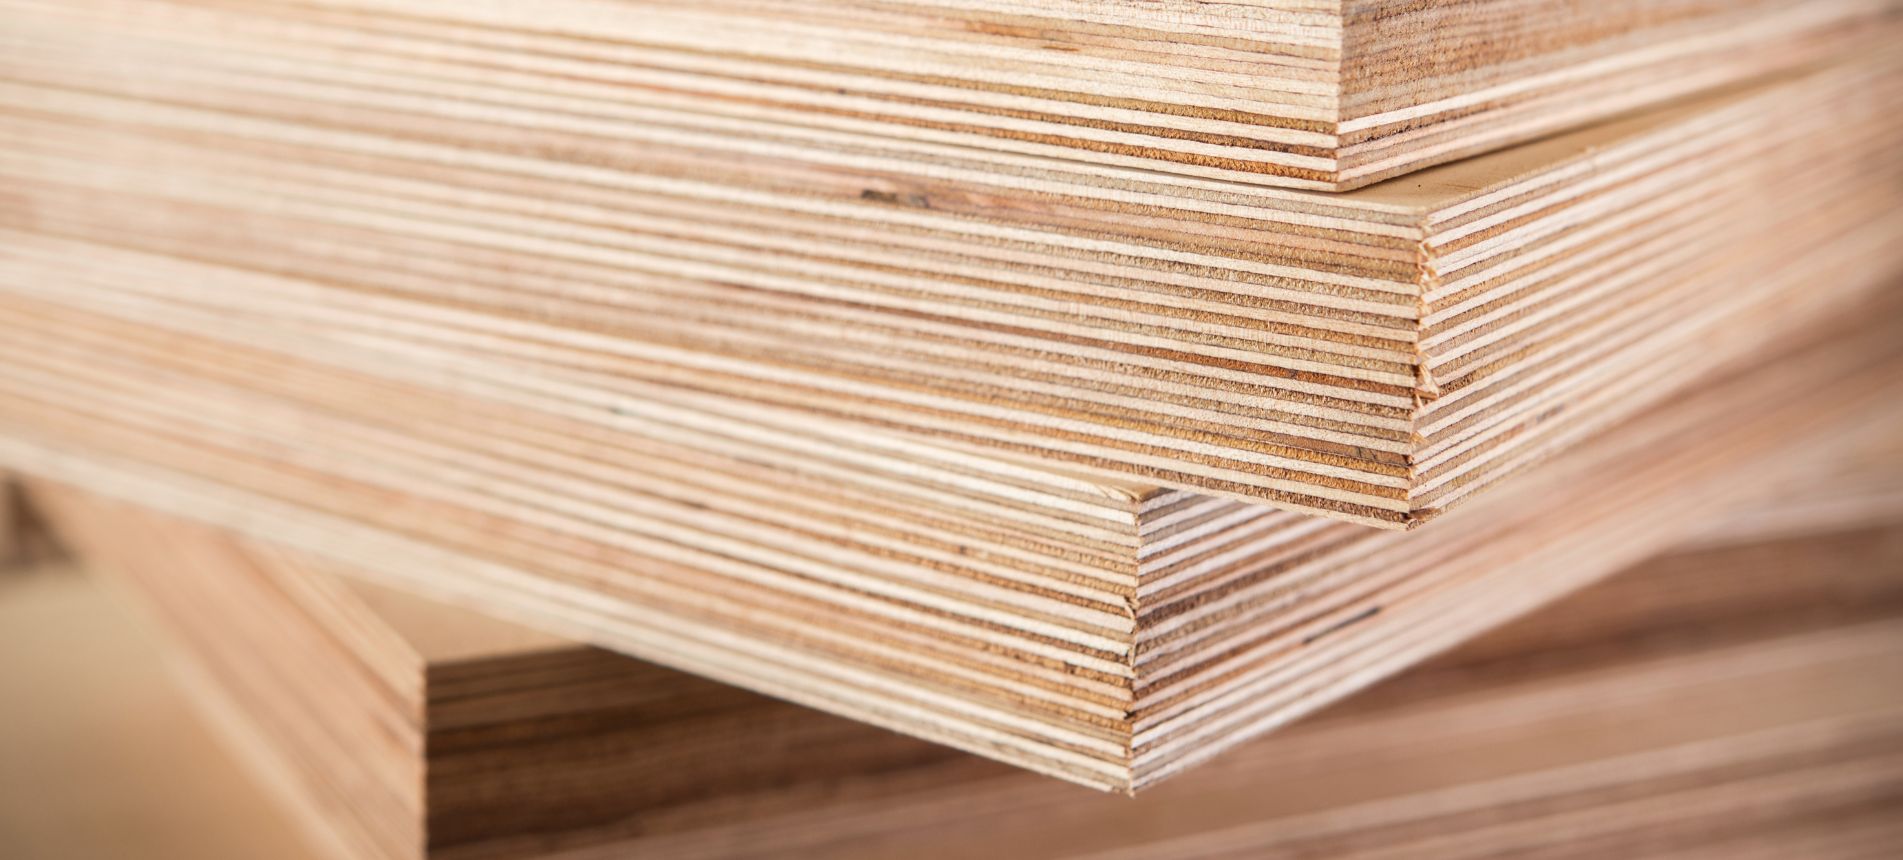 Particle Board vs. Plywood: Which Is Better?